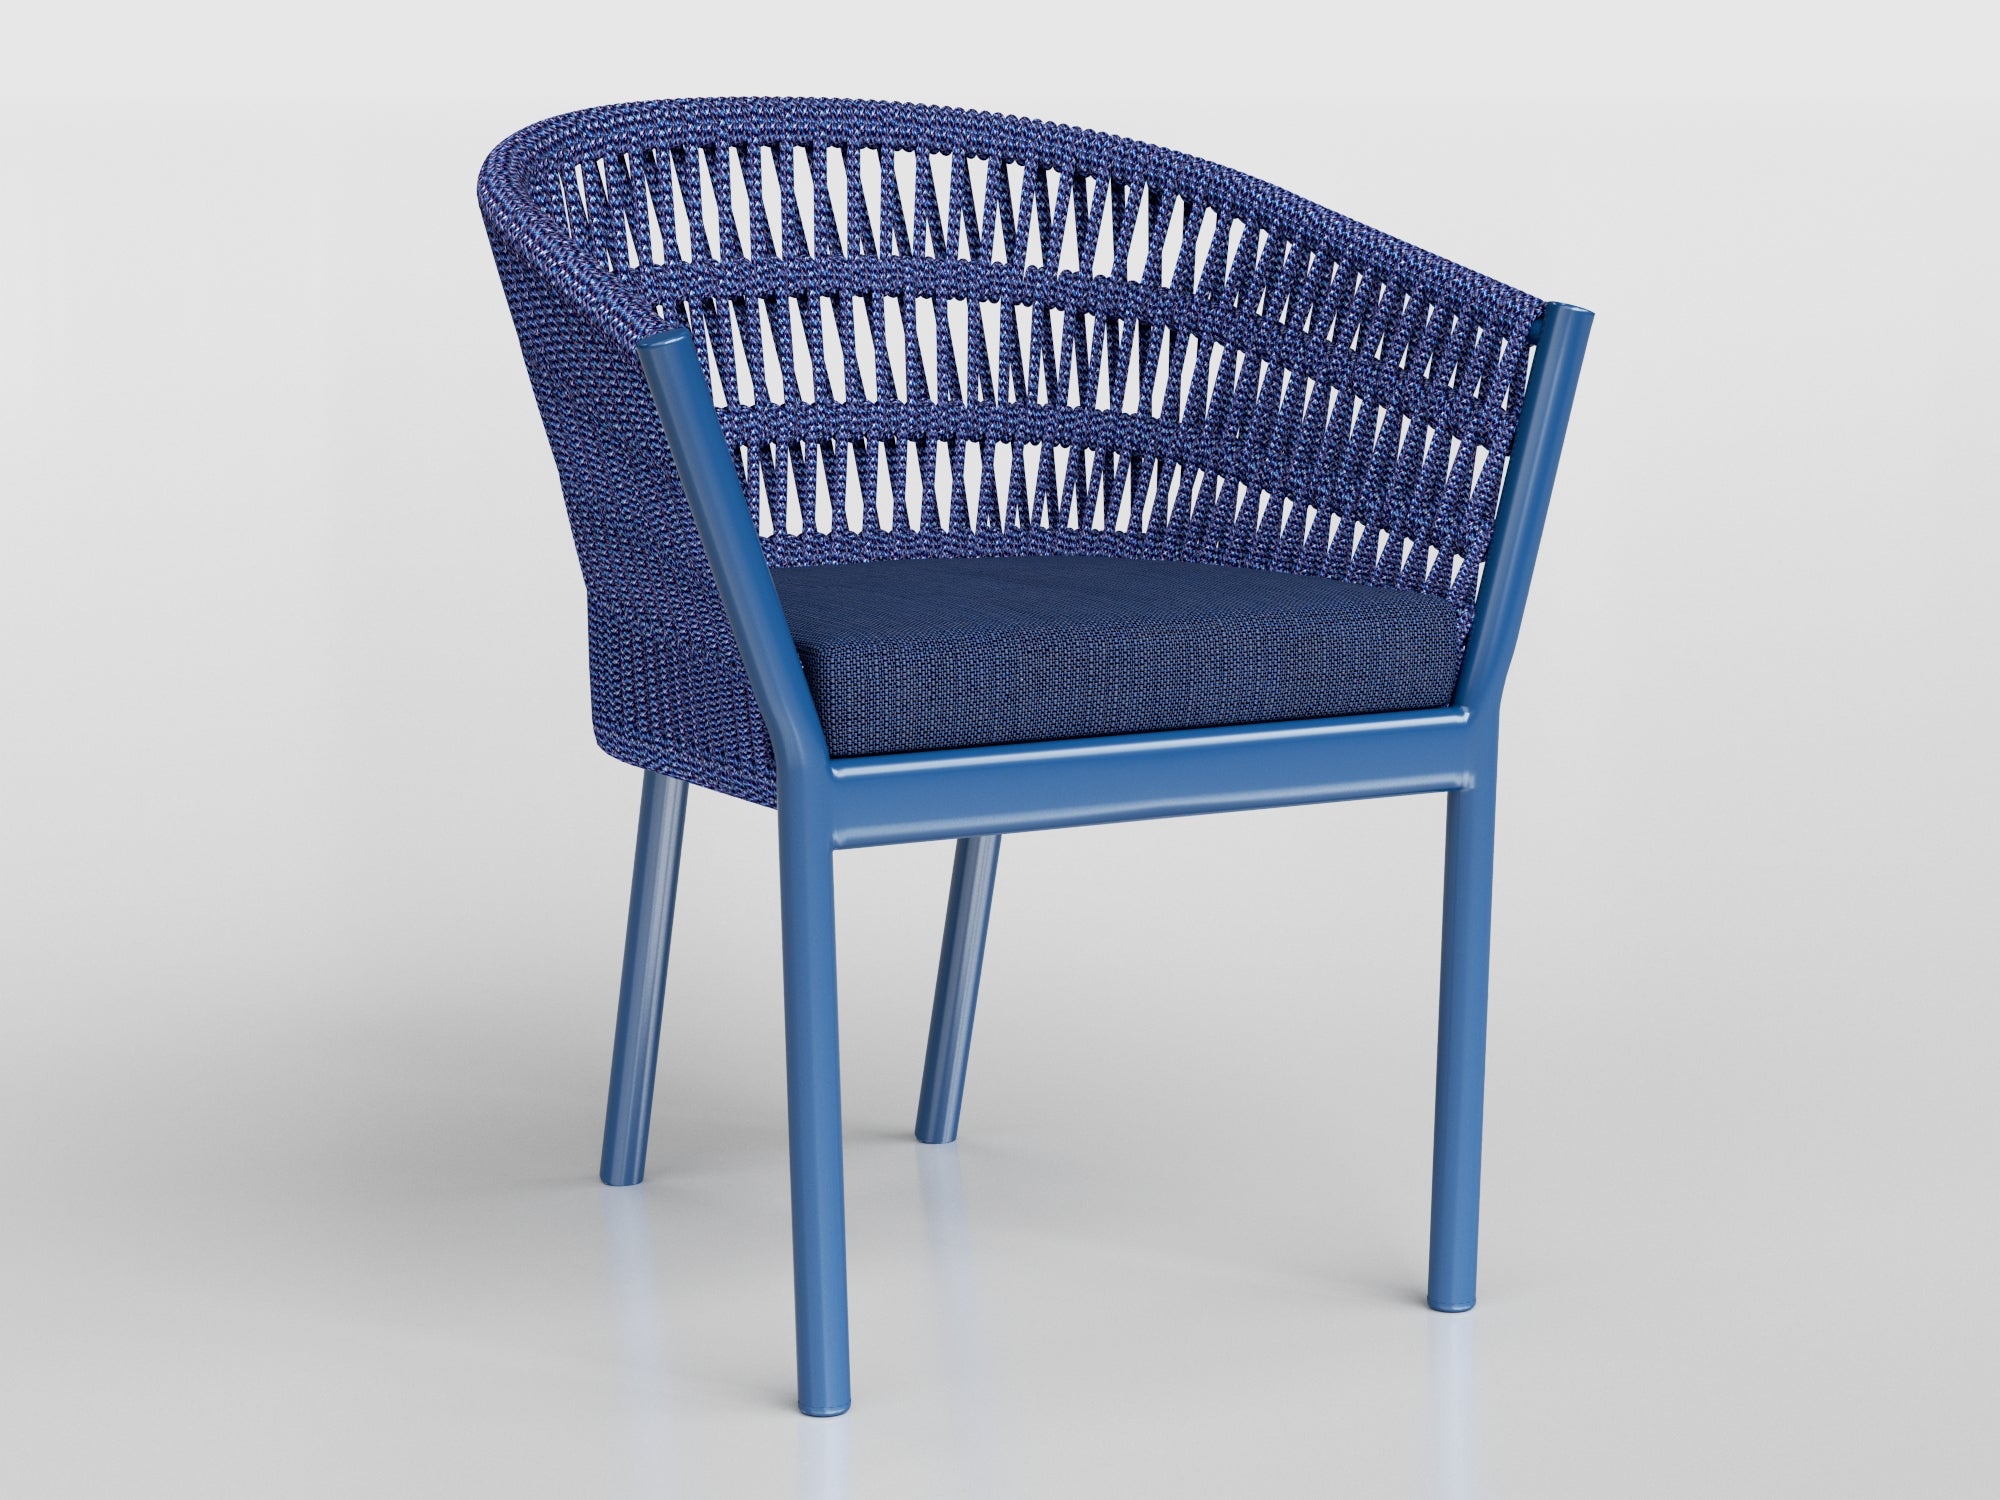 Kauai Chair with aluminum estruture, nautical rope finishing, stone top and Includes seat and back cushions upholstery, designed by Luciano Mandelli